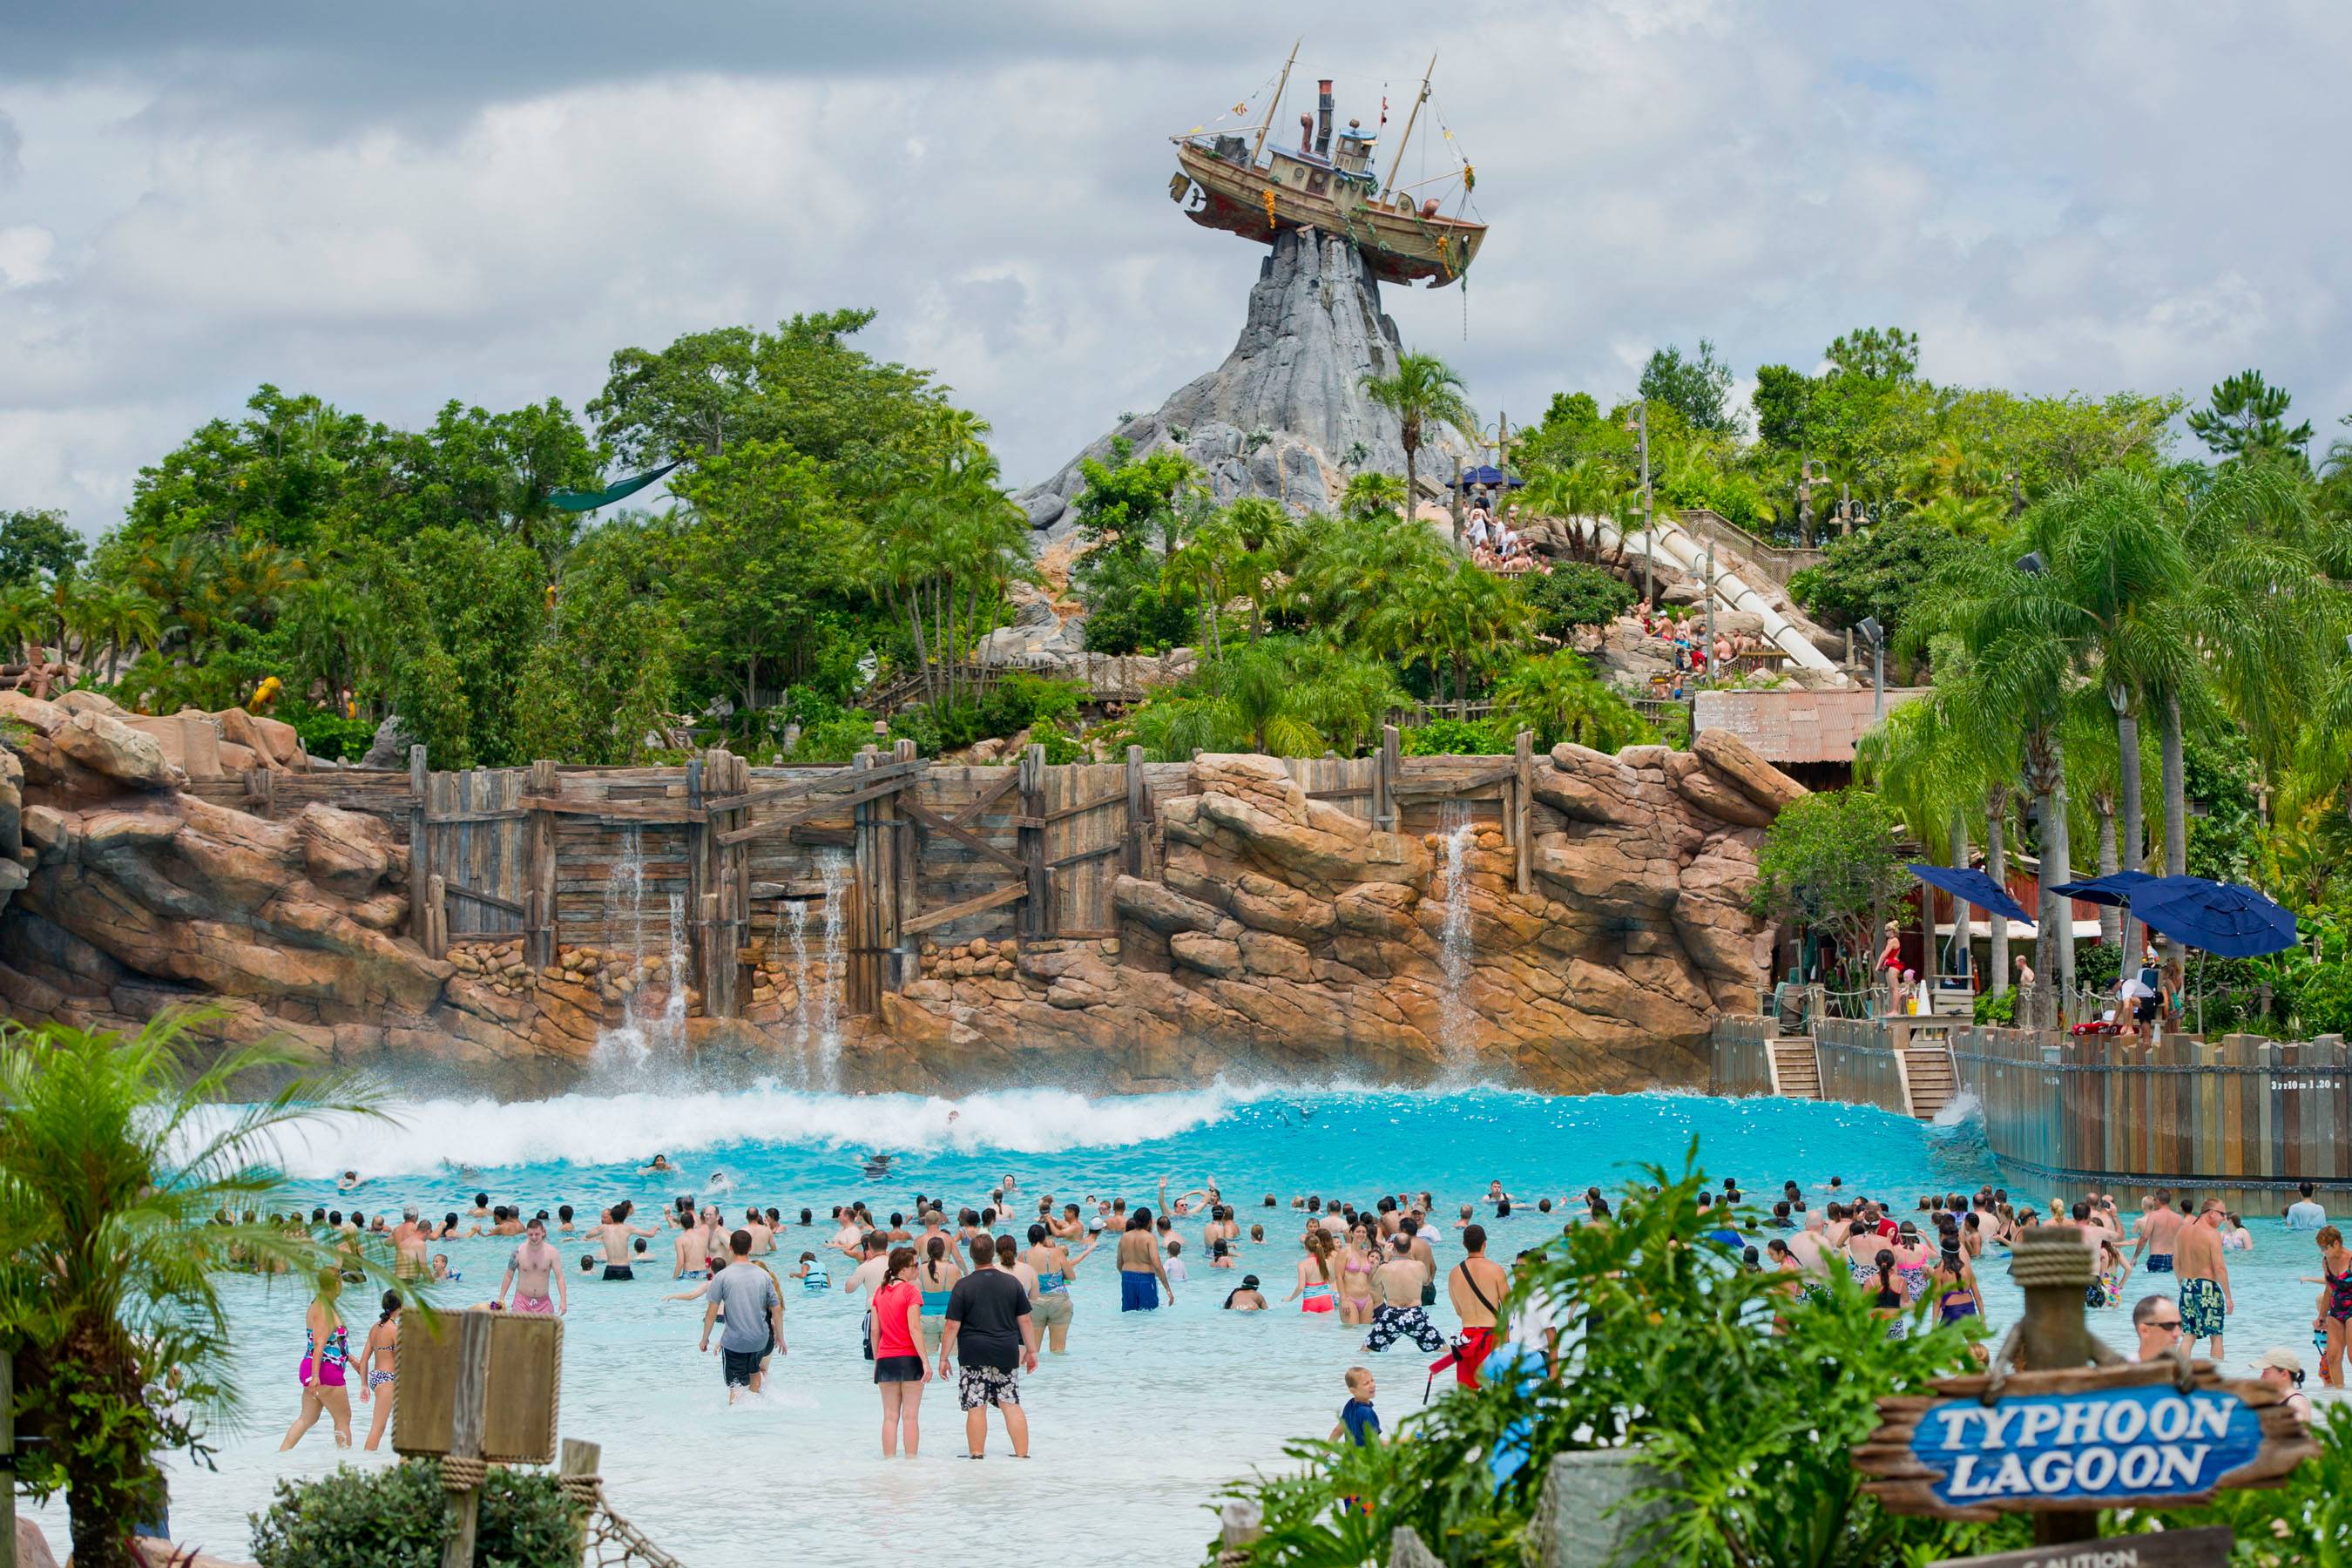 Poor weather closes Typhoon Lagoon and impacts Disney's Spirit of Aloha Dinner Show